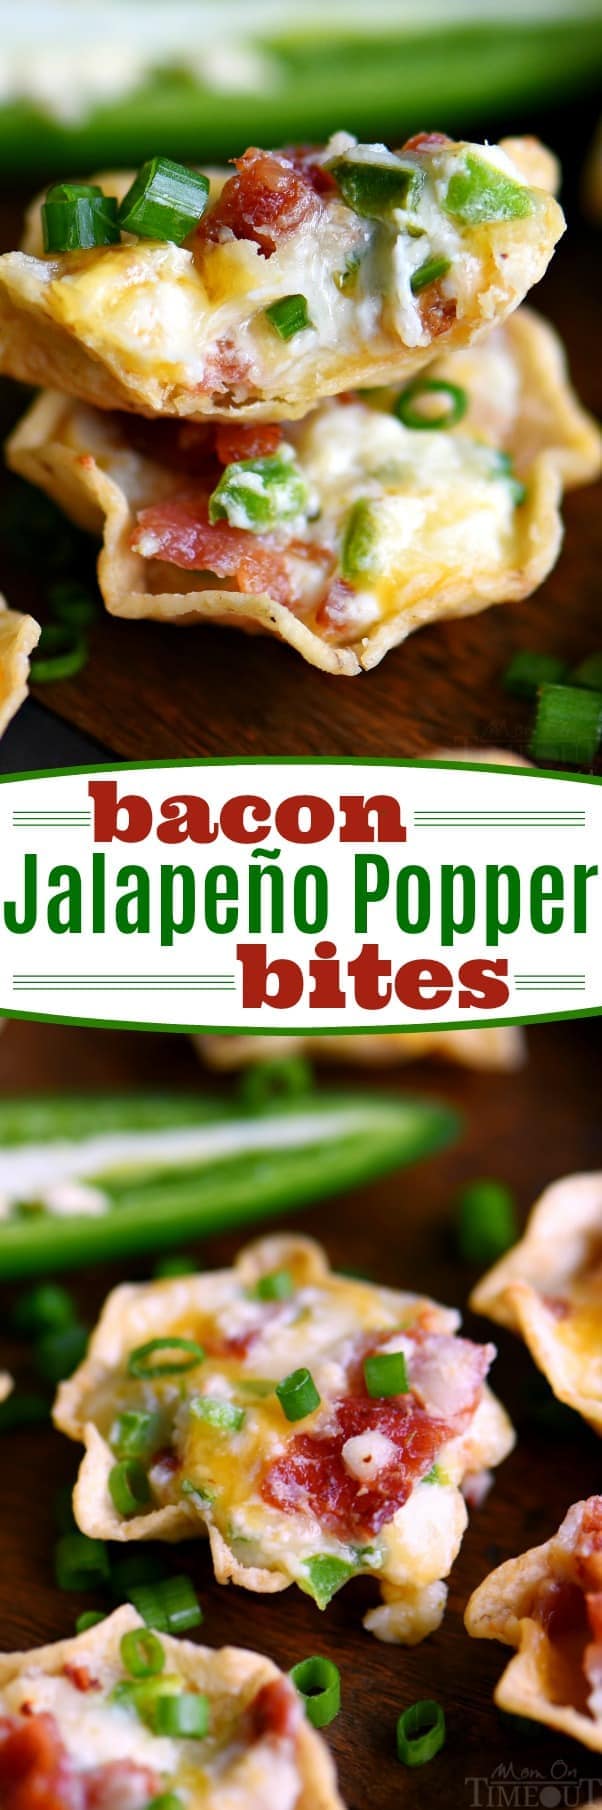 These Bacon Jalapeño Popper Bites are the ULTIMATE appetizer! Cheesy, creamy, spicy, bite-sized and did I mention loaded with bacon?? Sure to be the hit of your next party! // Mom On Timeout #appetizer #bacon #creamcheese #gameday #holiday #entertaining #ad @FritoLay #mingleinabox #sweepstakes